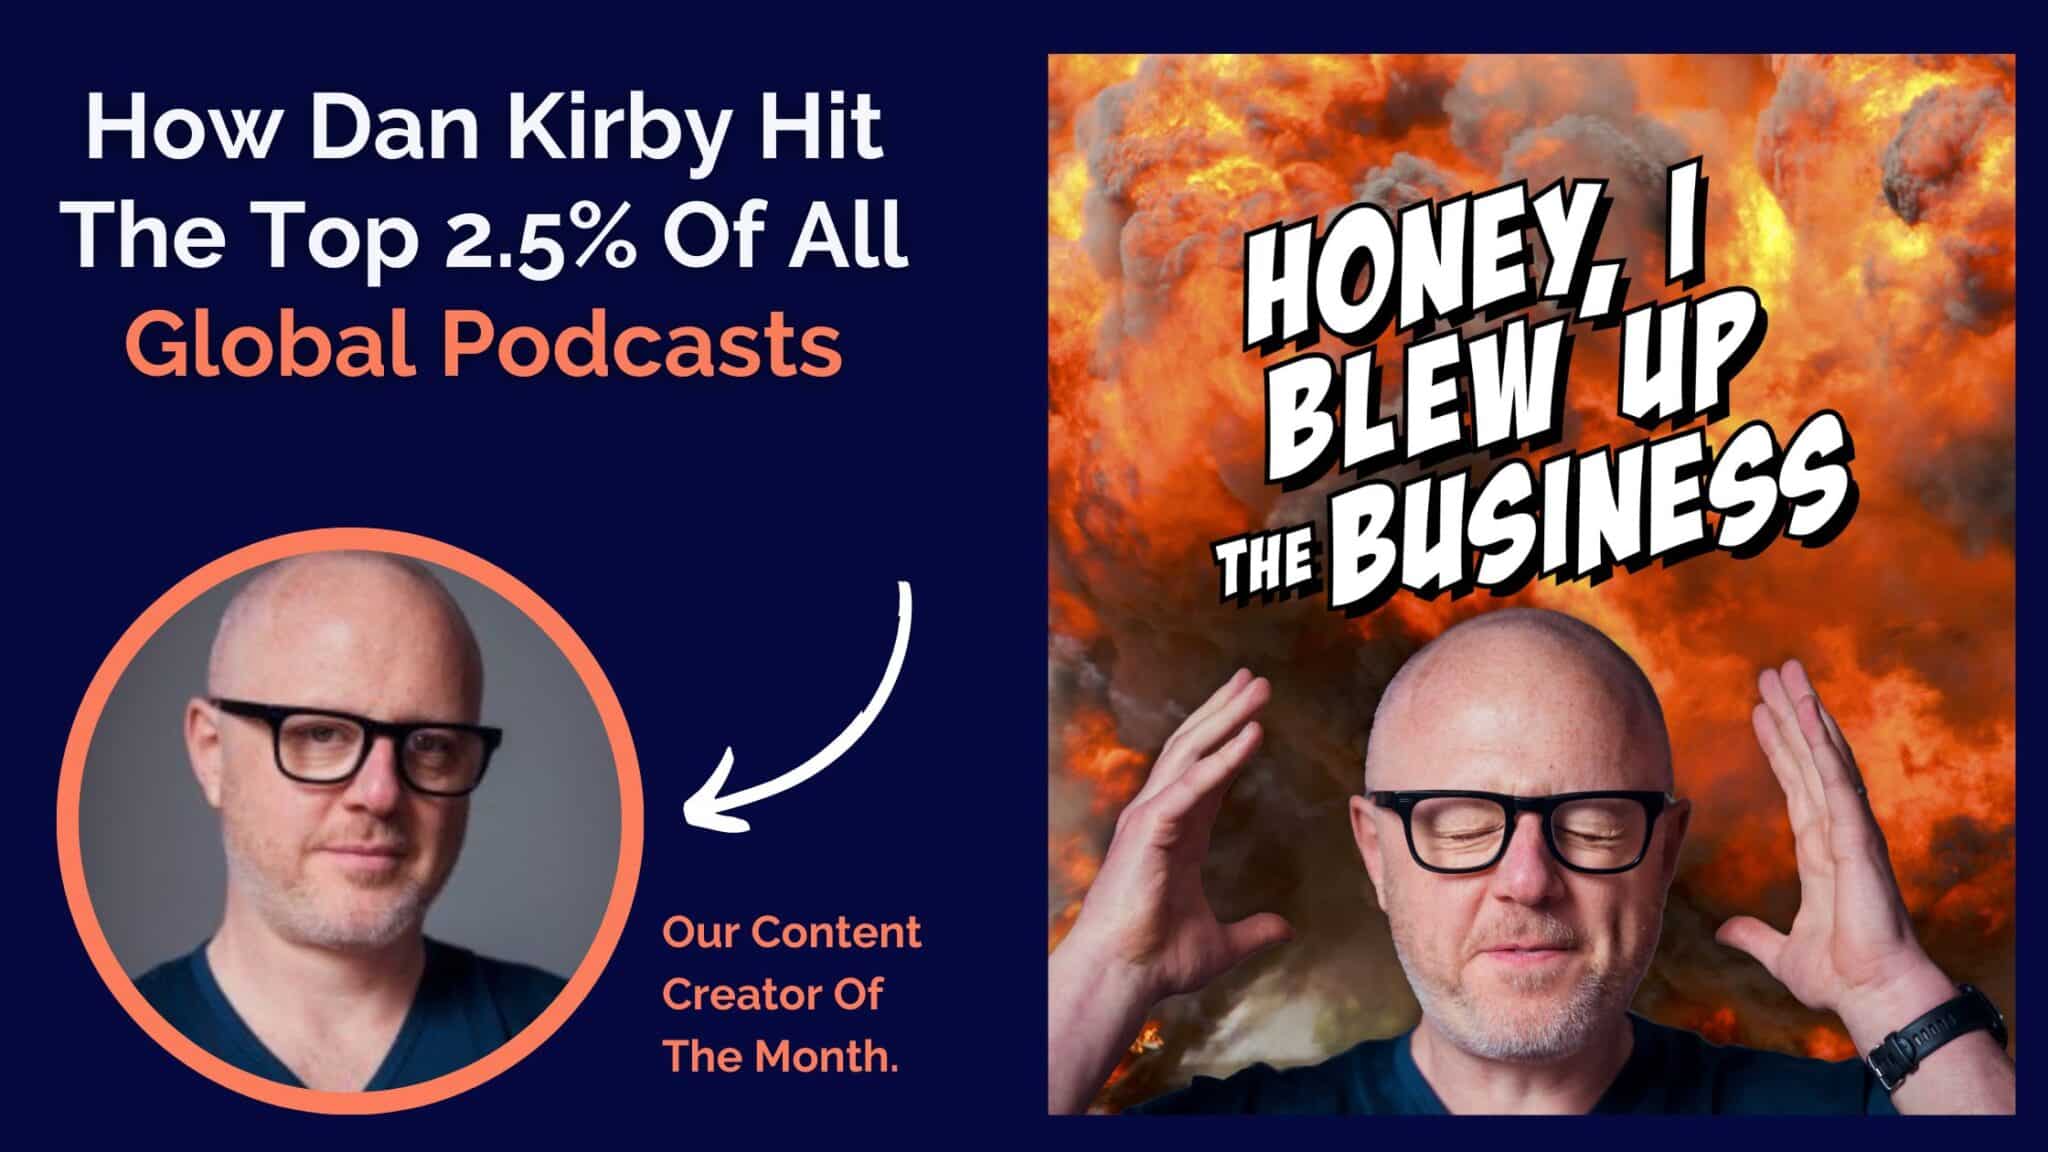 How Dan Kirby Hit The Top 2.5% Of All Global Podcasts